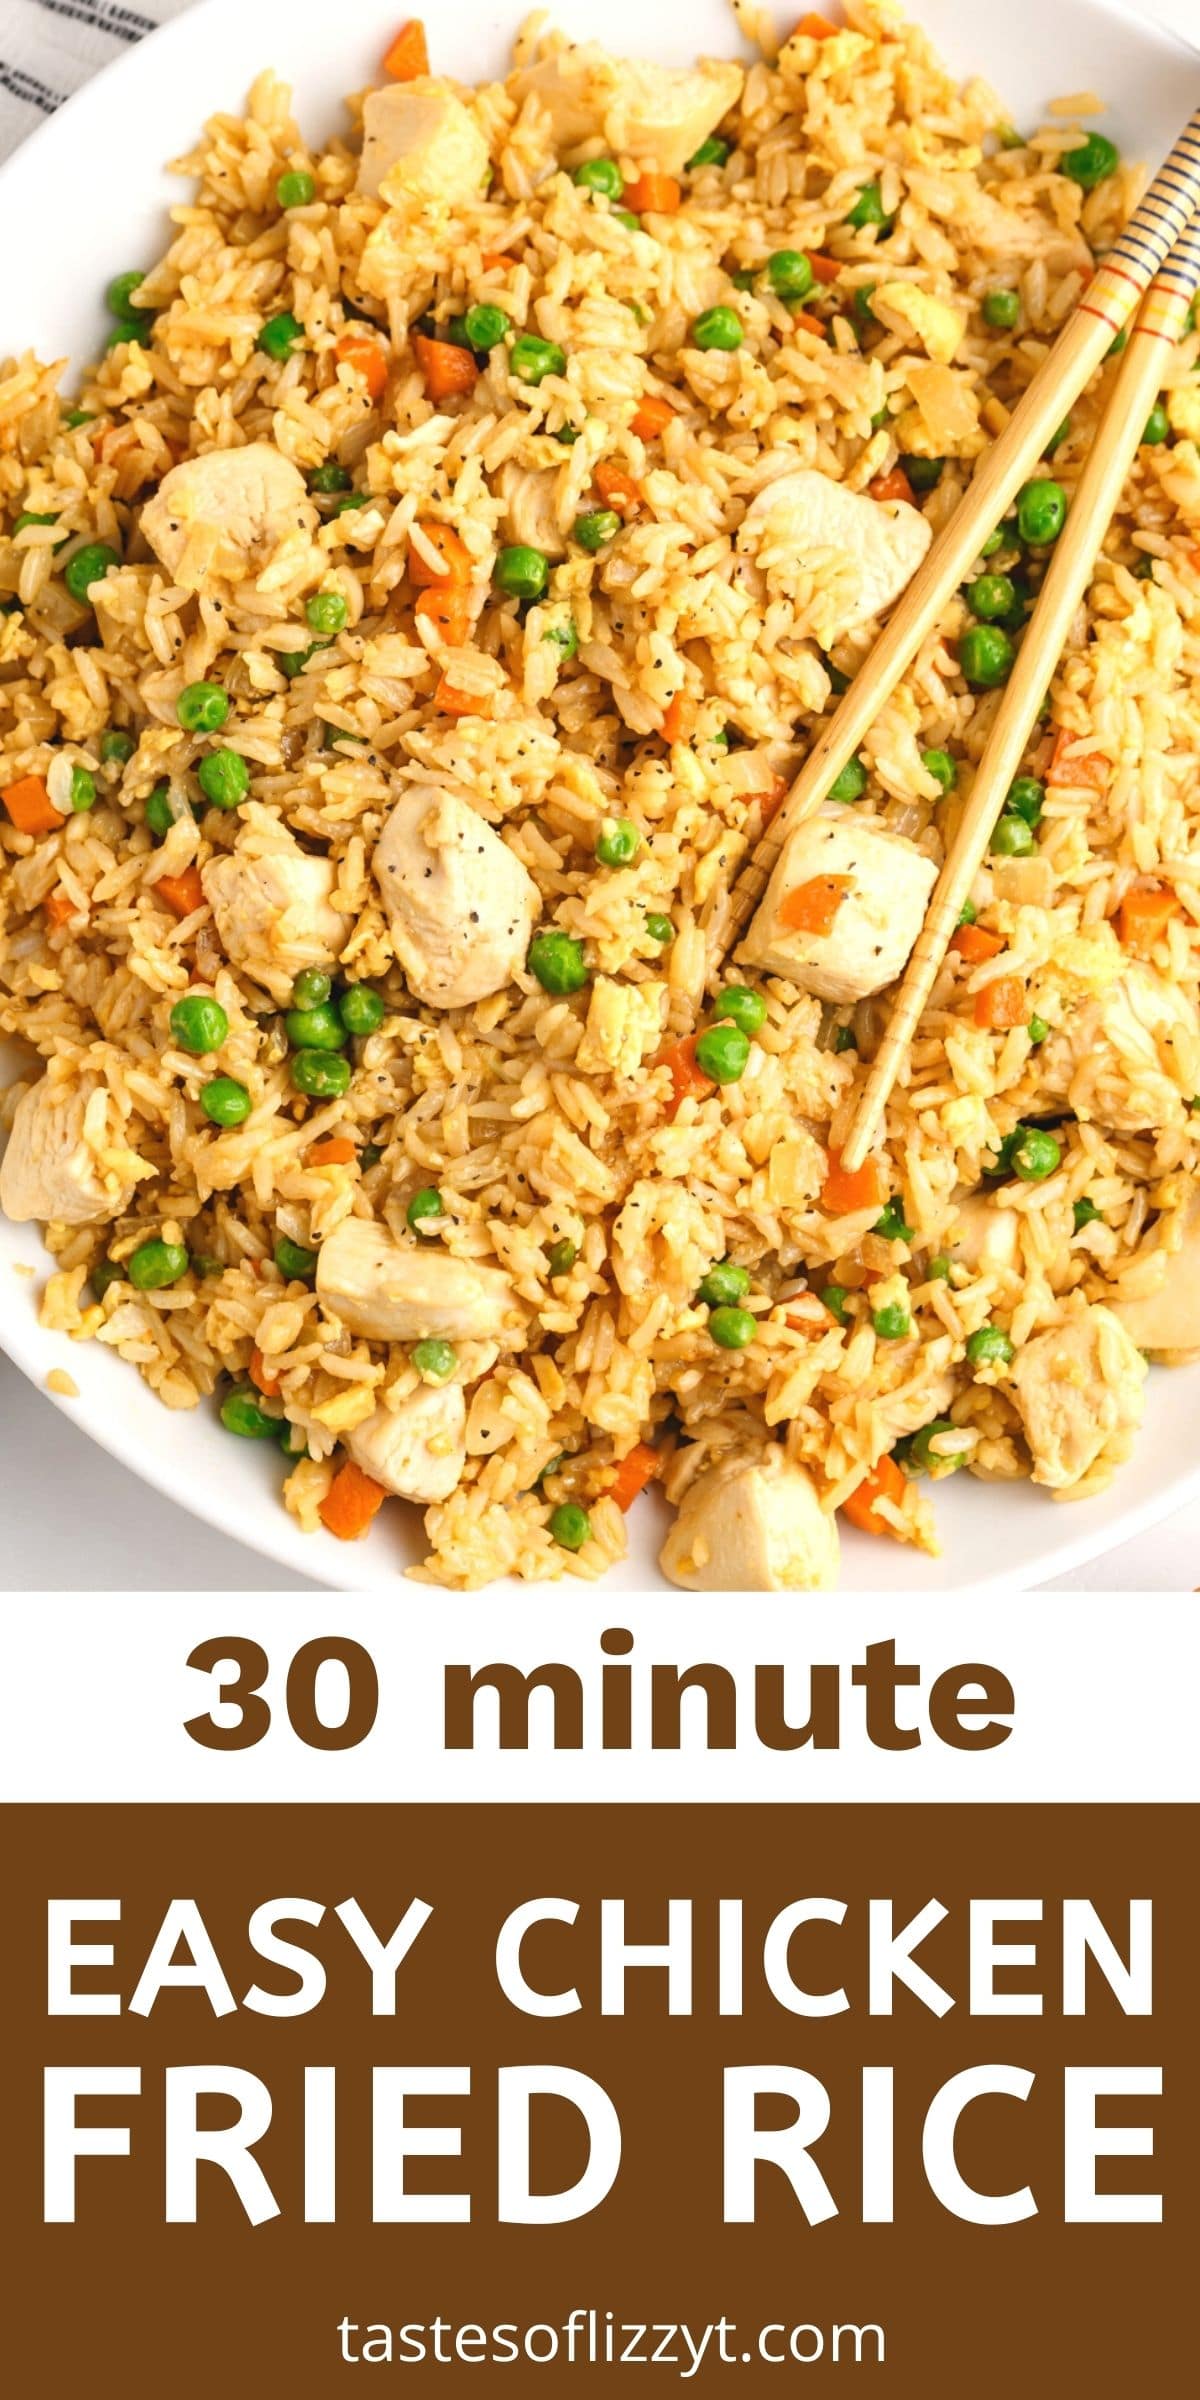 Curious how to make chicken fried rice in the easiest way? Use our recipe for savory fried rice in less than 30 minutes with simple, pantry ingredients. Don't forget our secret ingredient. via @tastesoflizzyt